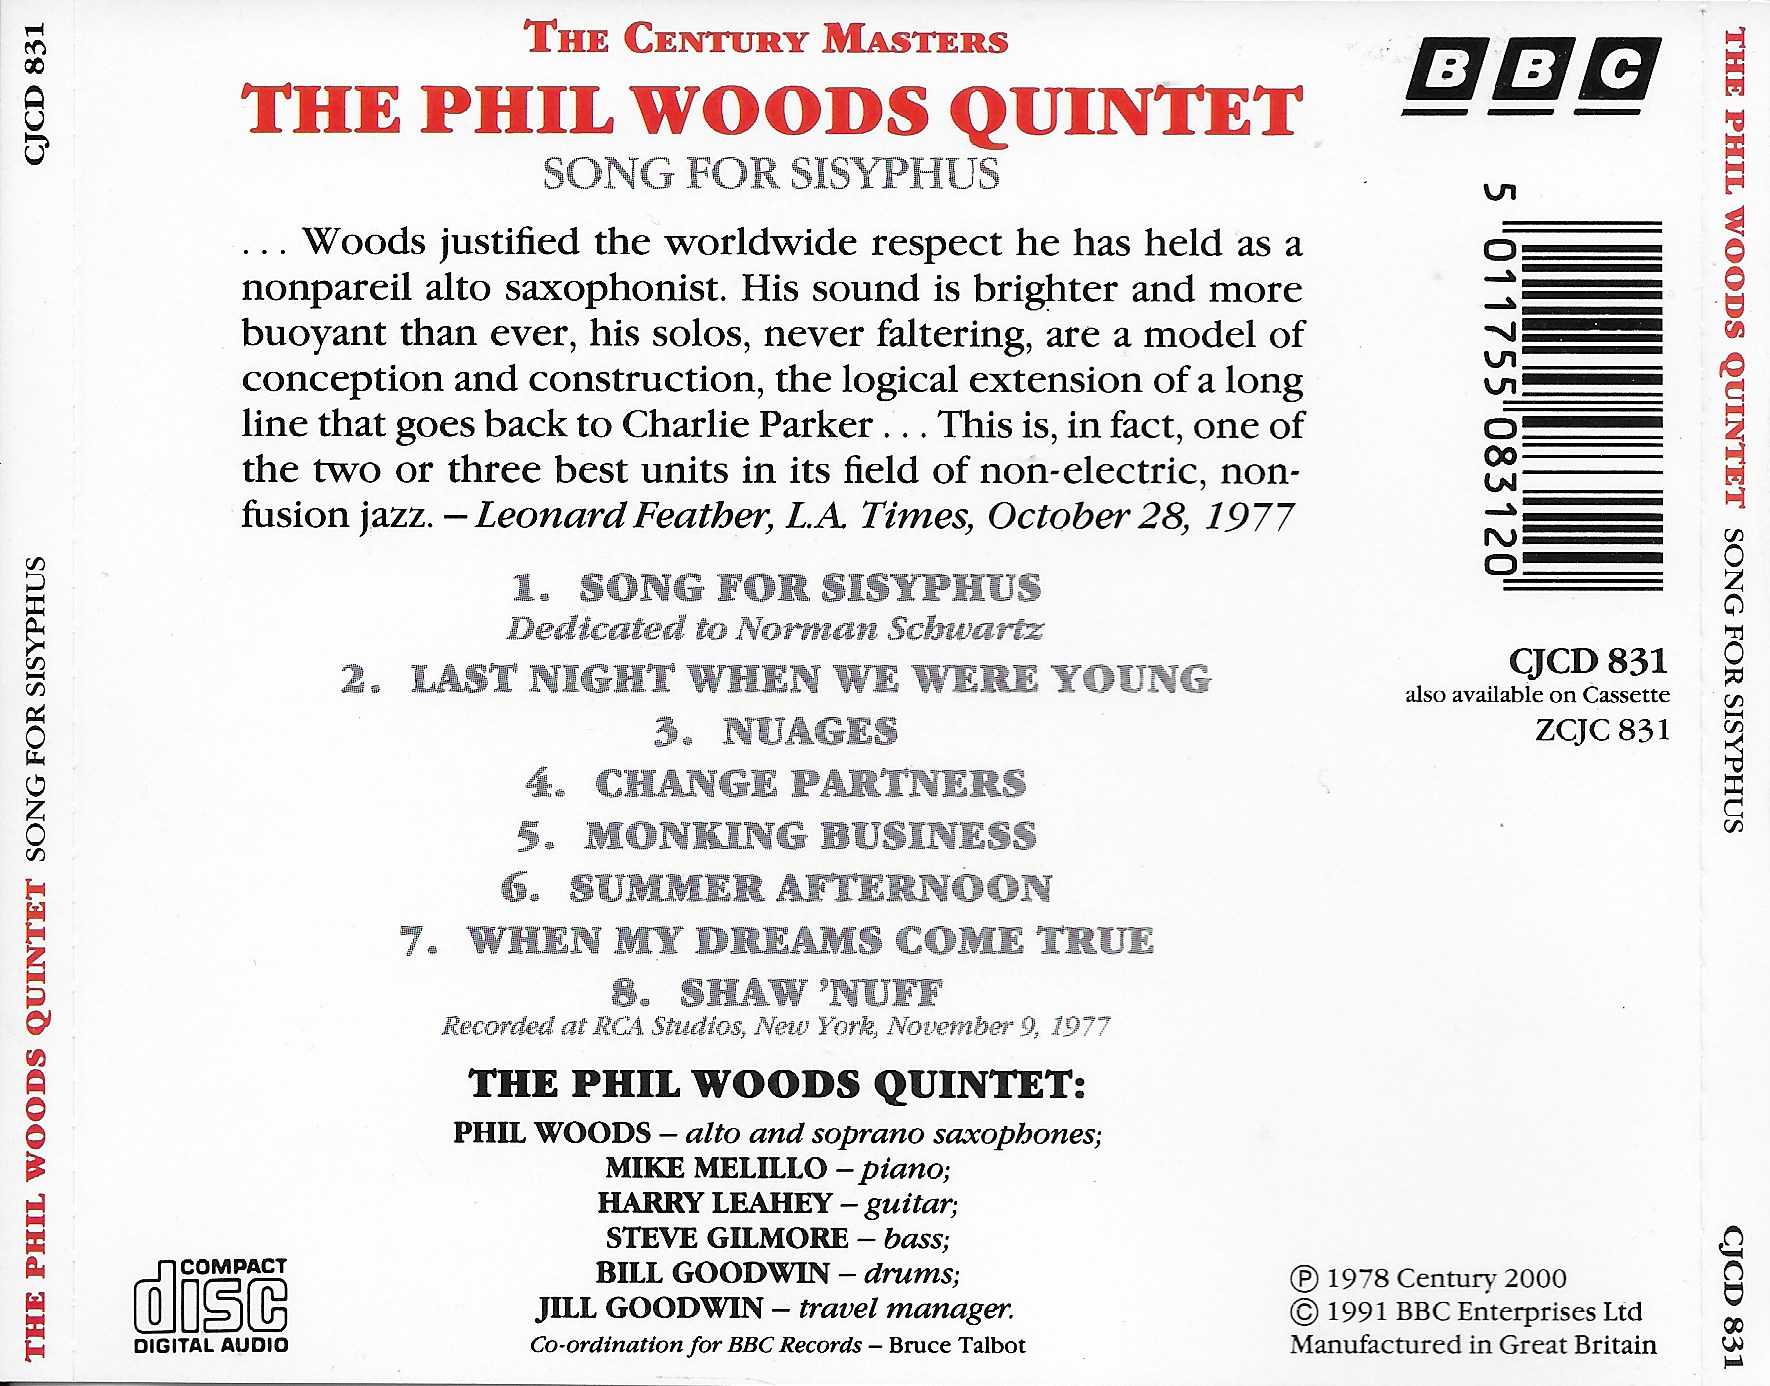 Picture of CJCD 831 The Century Catalogue - Song for Sisyphus by artist The Phil Woods Quintet from the BBC records and Tapes library